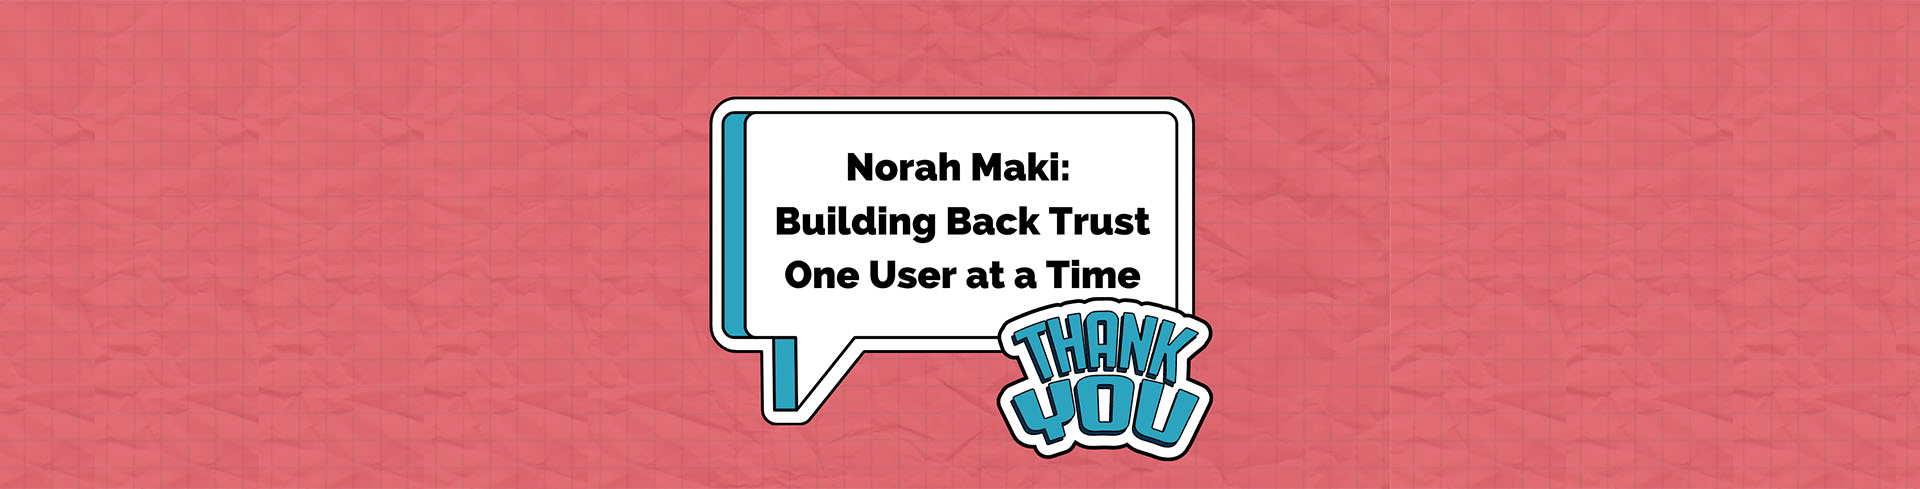 Image with text - Norah Maki Building Back Trust One User at a Time.